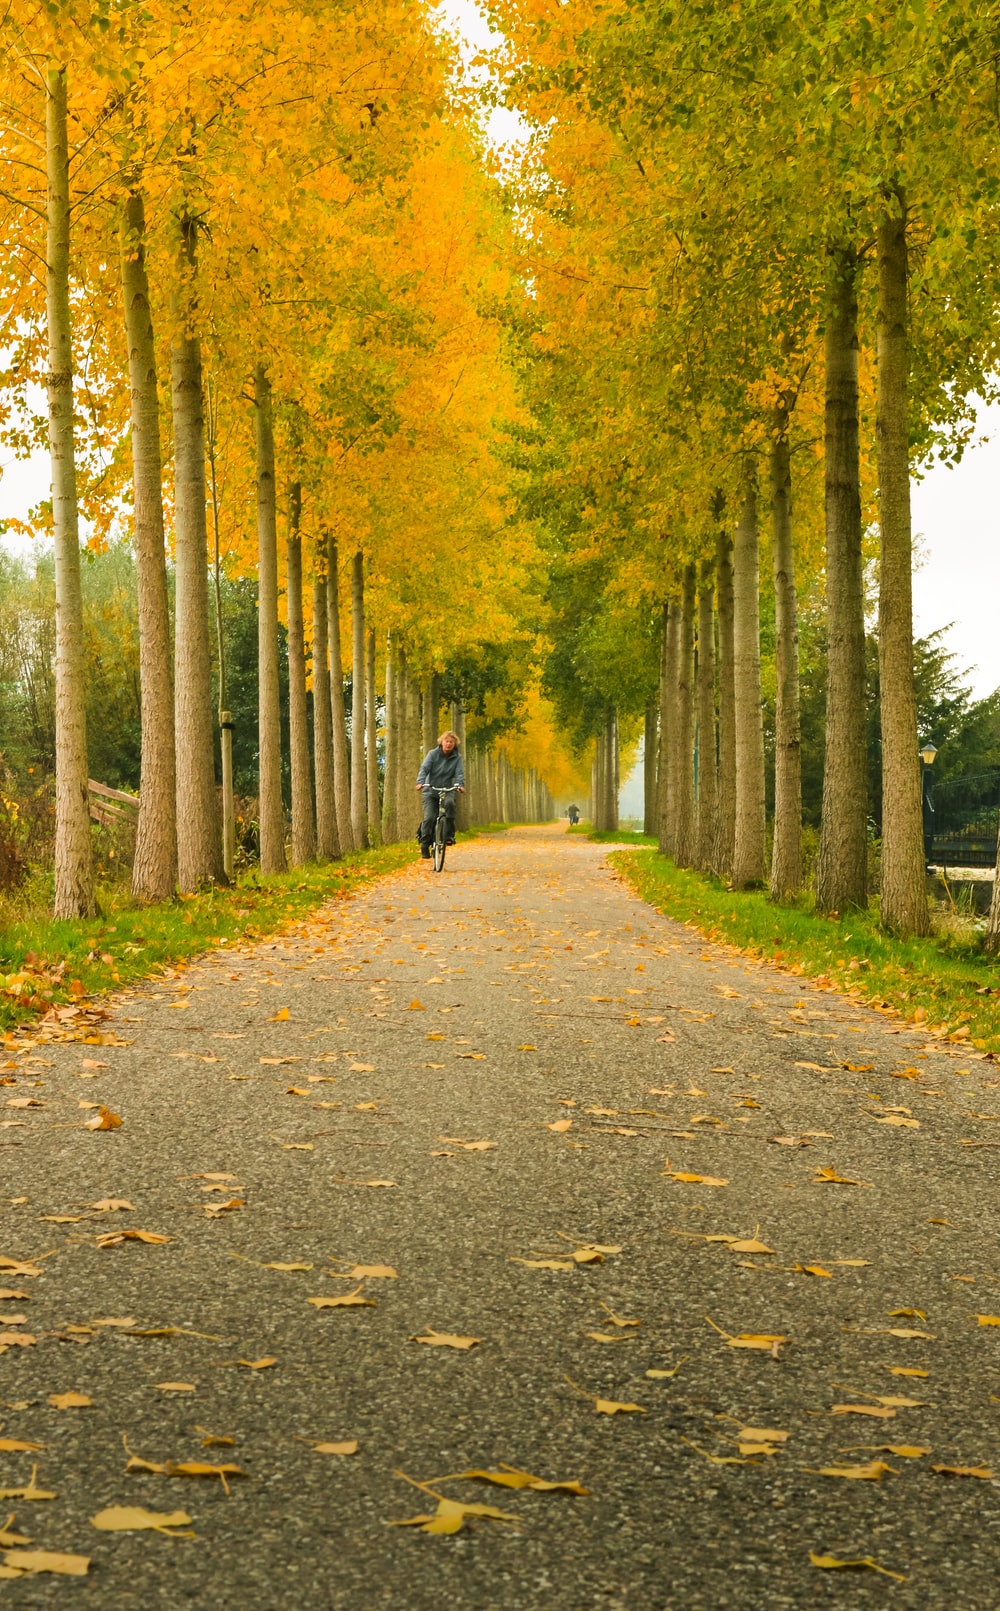 Yellow Trees Picture. Download Free Image